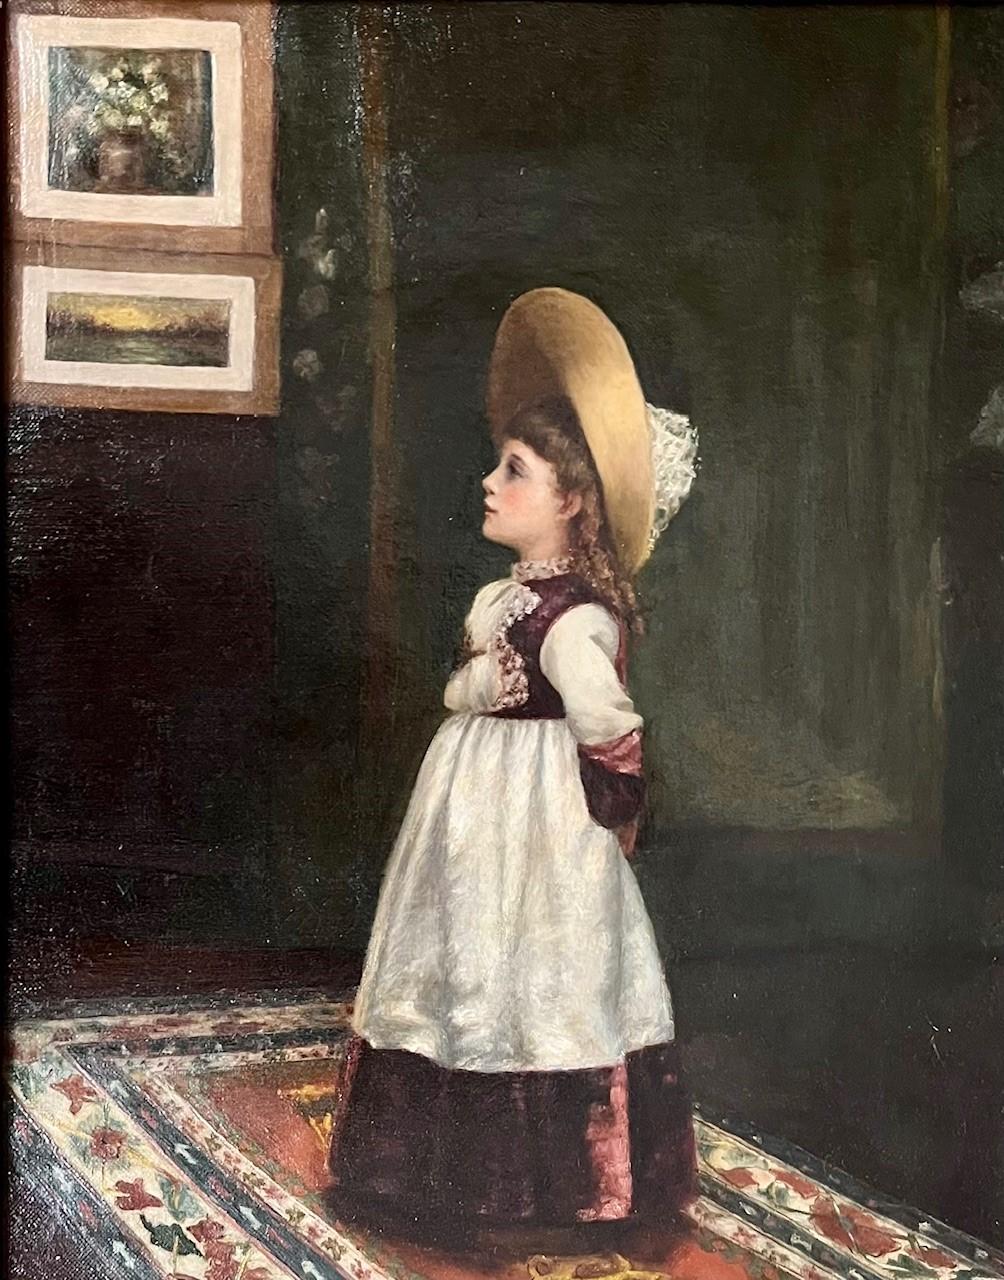 19th Century American School Portrait Oil Painting of a Young Girl.

Wonderful antique portrait of a charming little girl standing in a warm toned room setting with oriental rug and tapestry wall decoration. She seems to view a pair of small